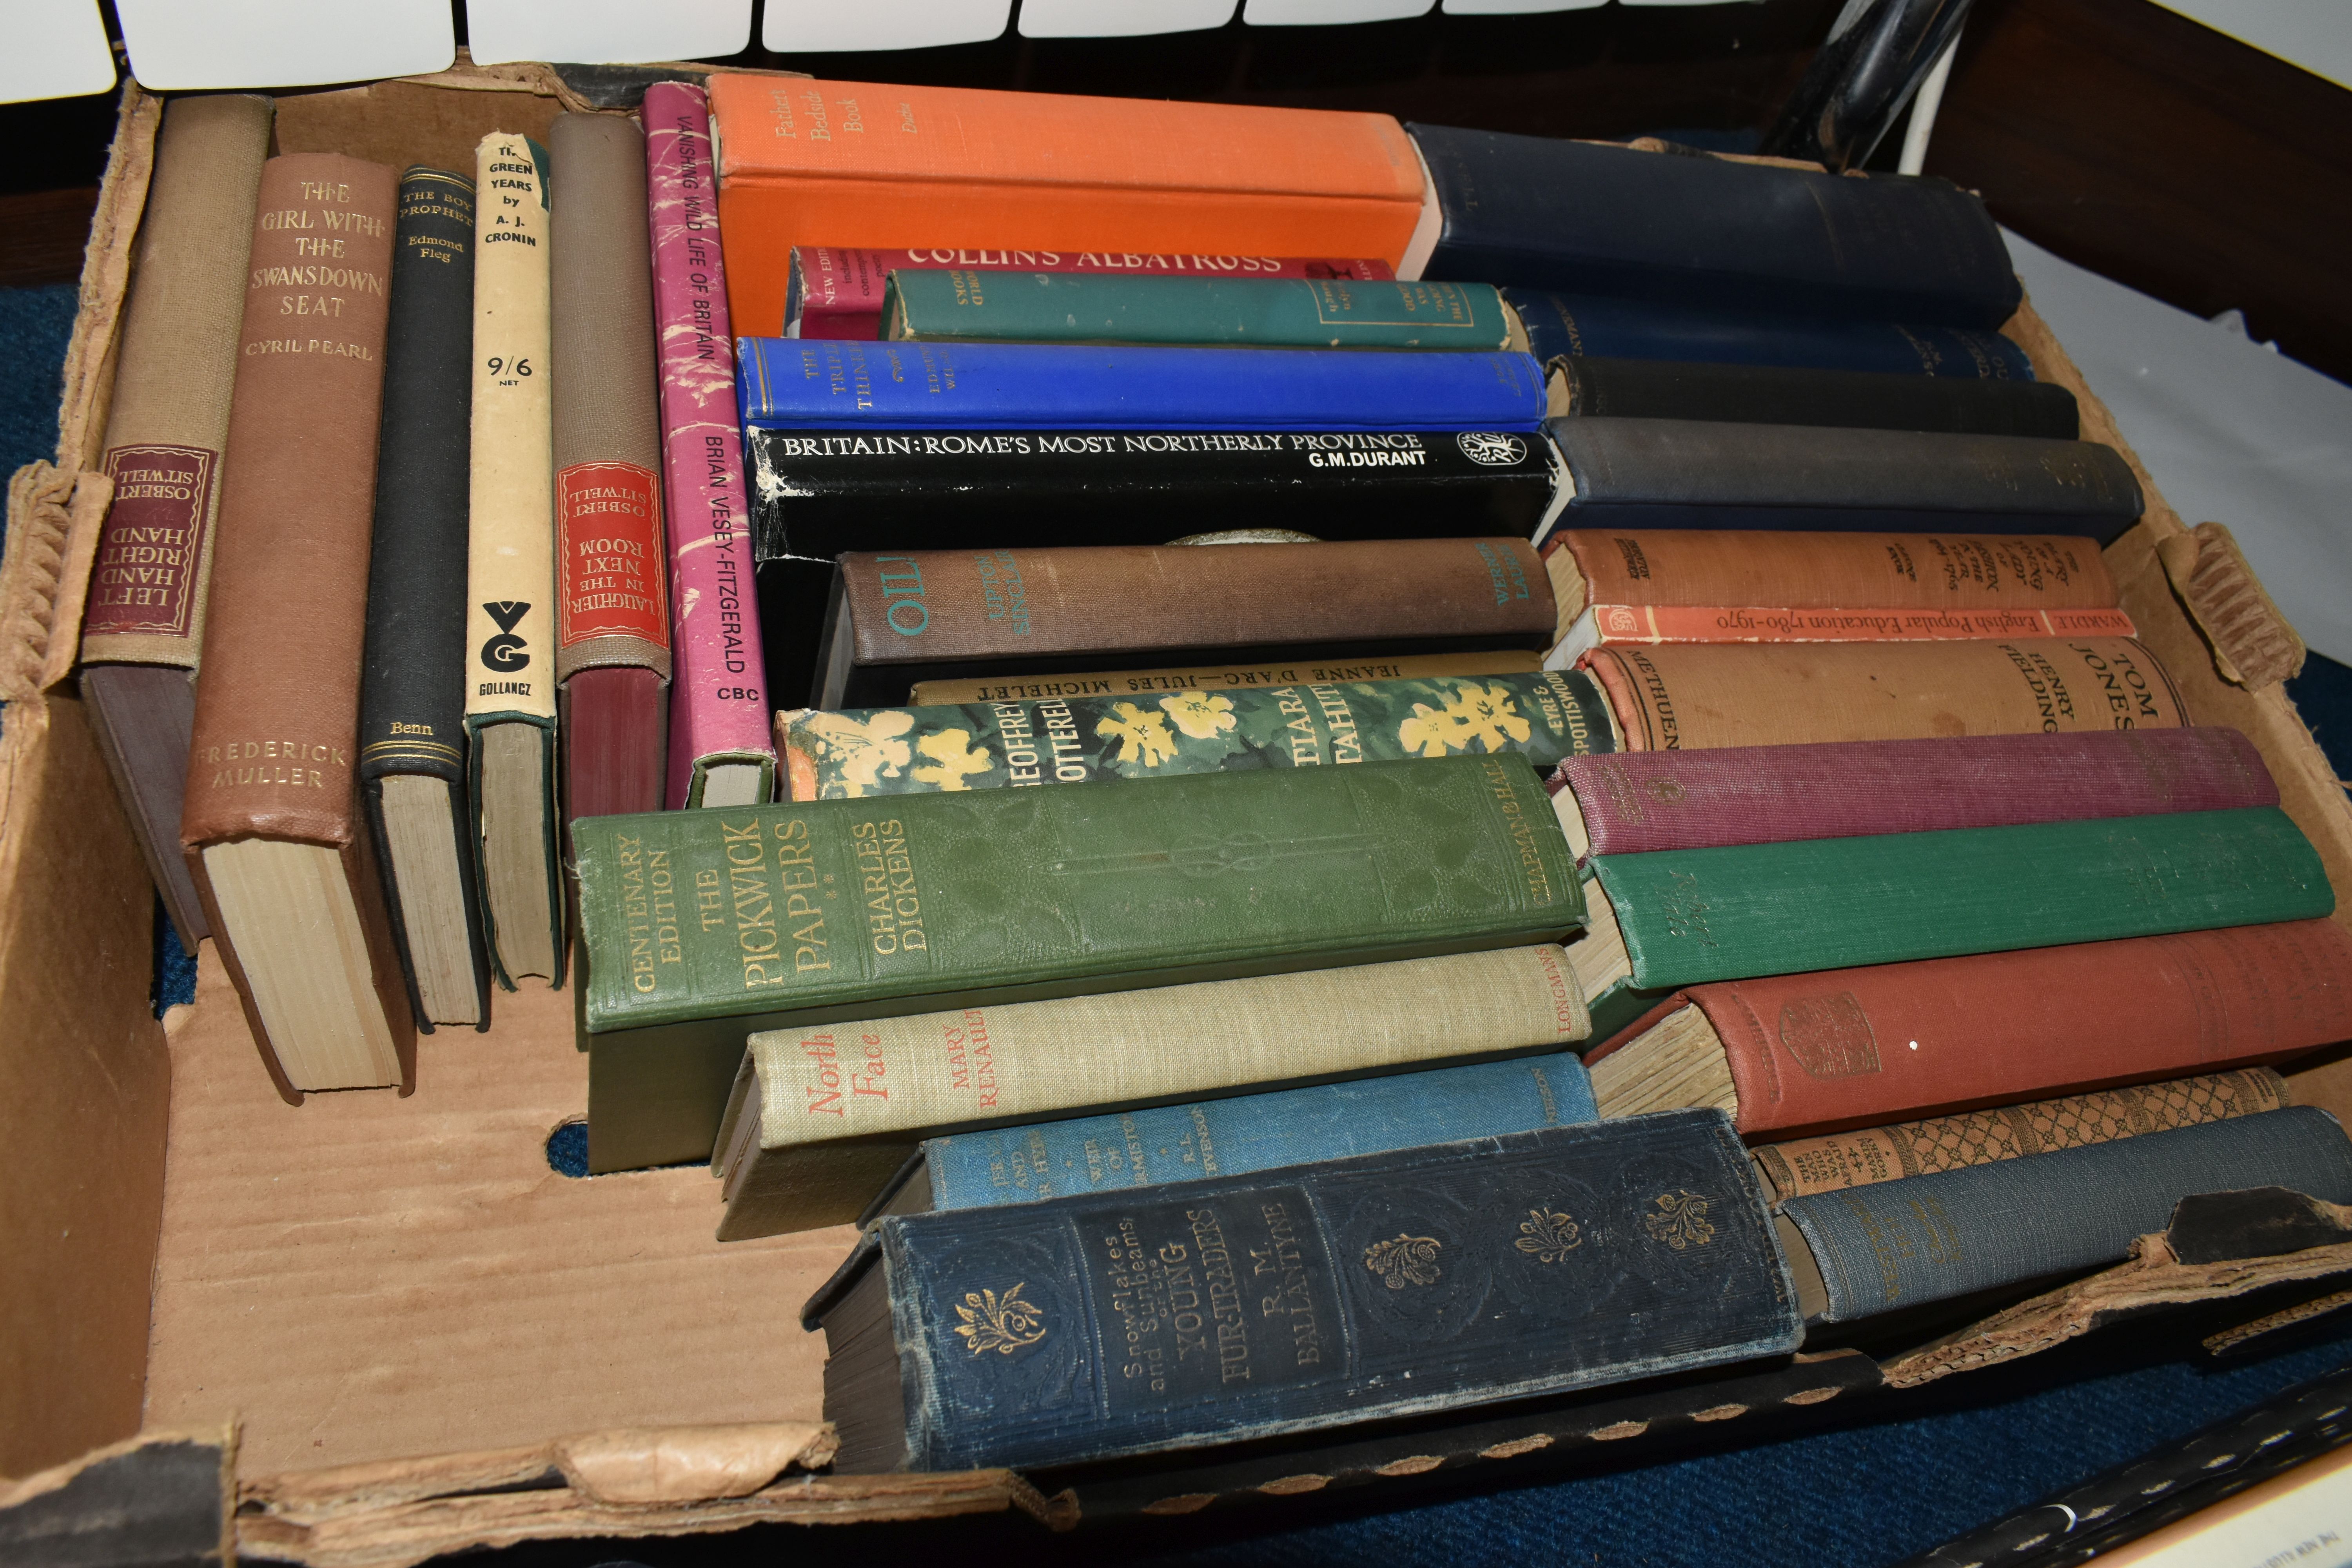 FOUR BOXES OF BOOKS, containing over 130 miscellaneous titles in hardback and paperback formats, - Image 6 of 6